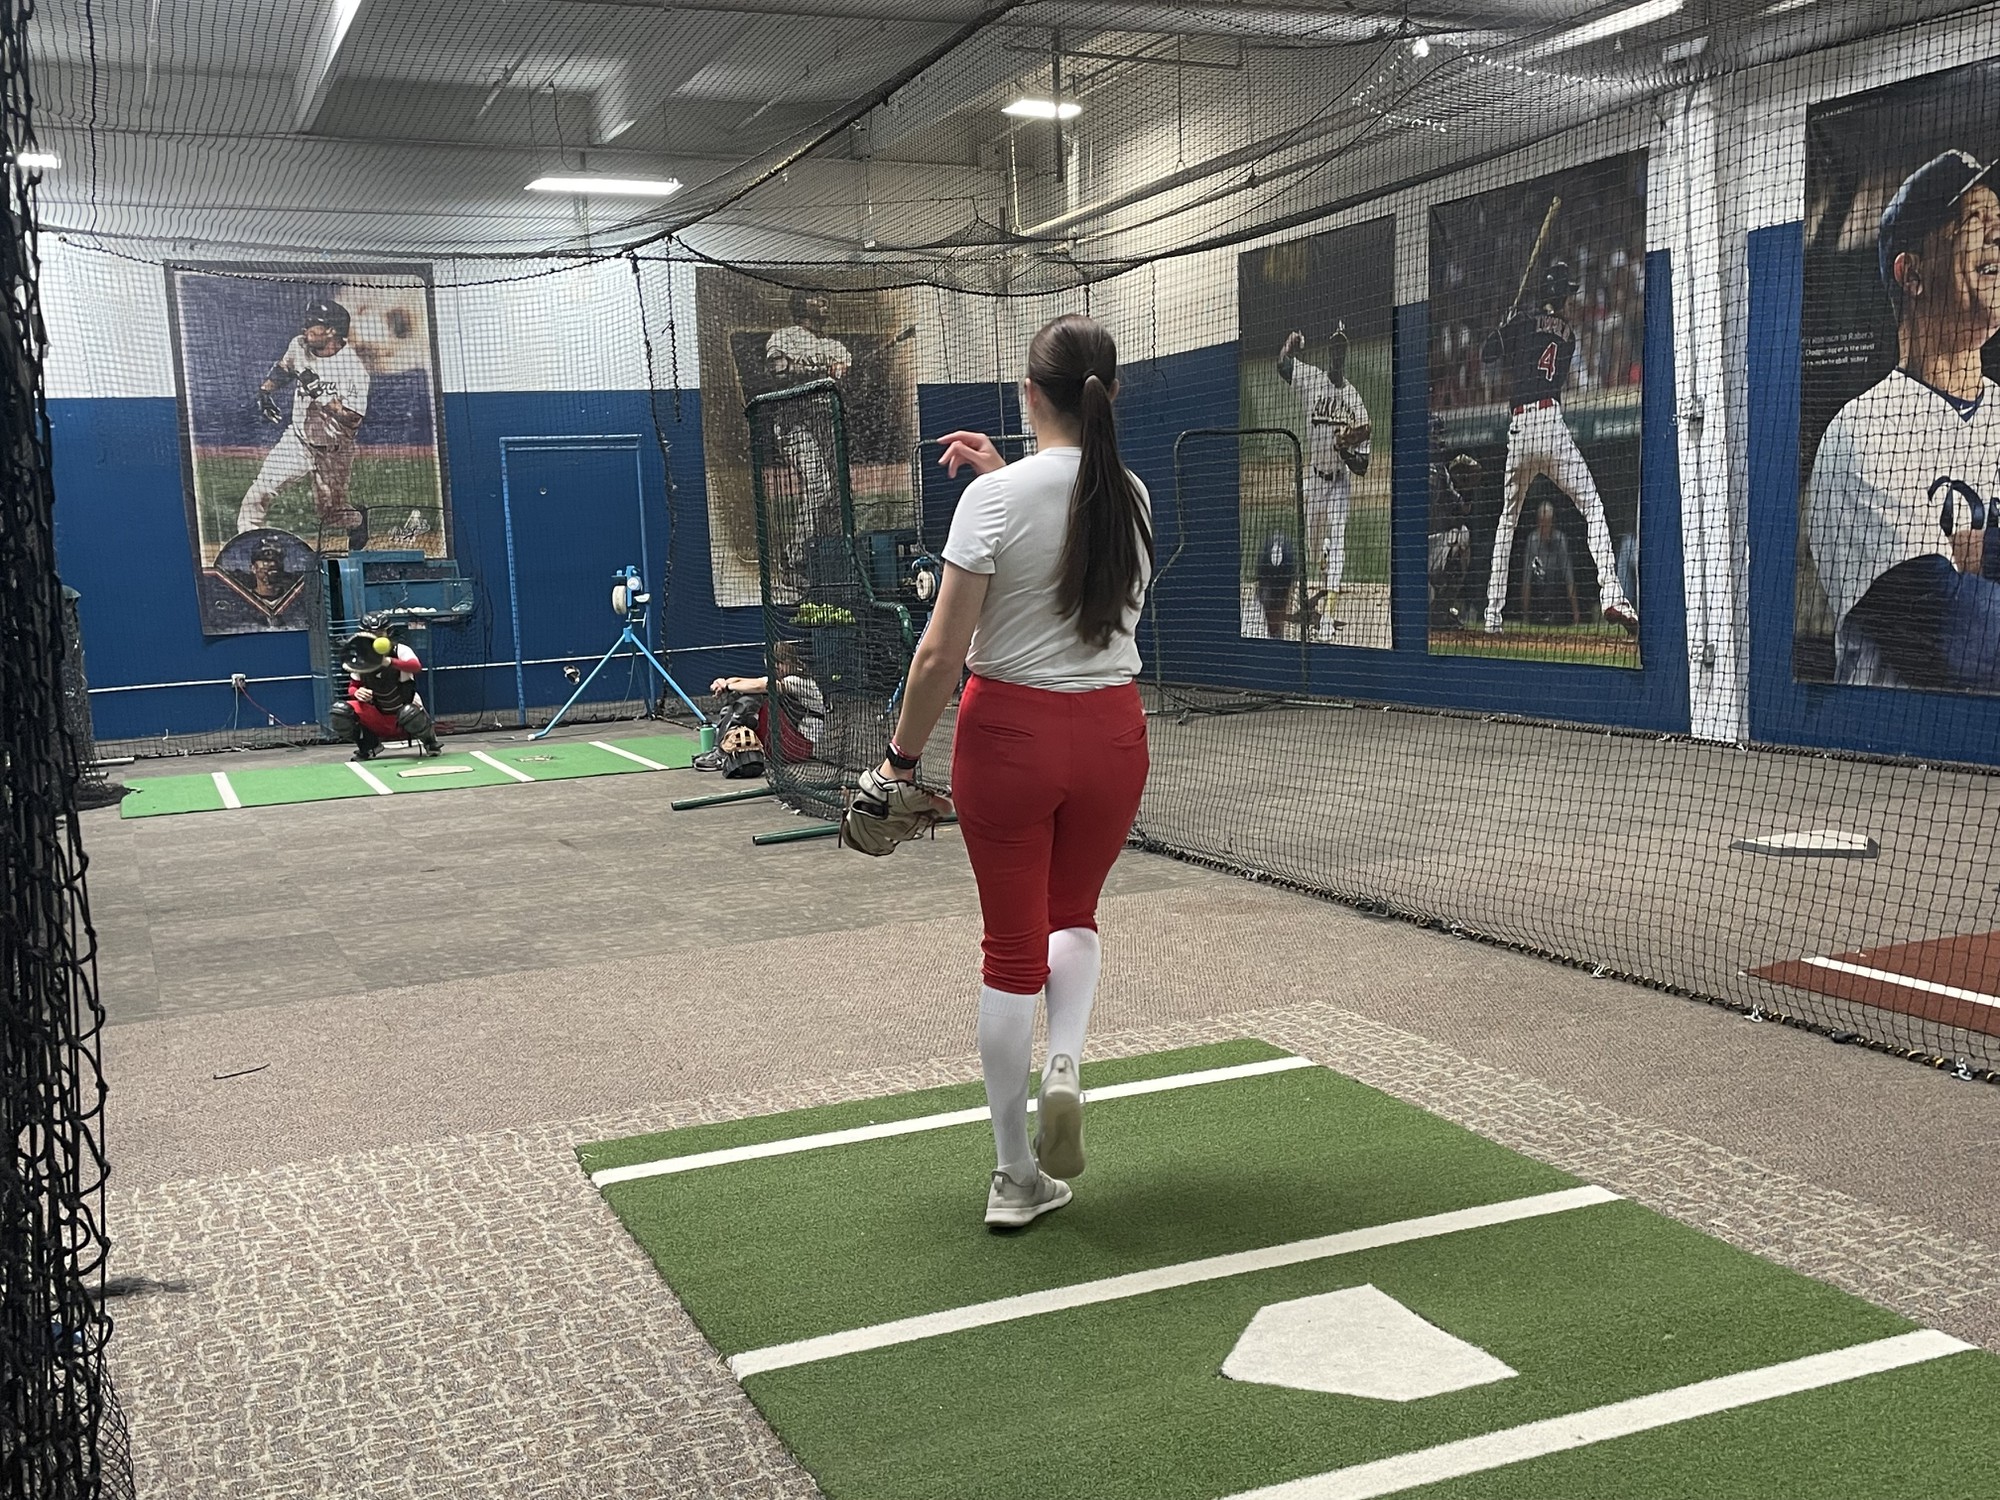 A female softball players practices her pitch inside a training facility.